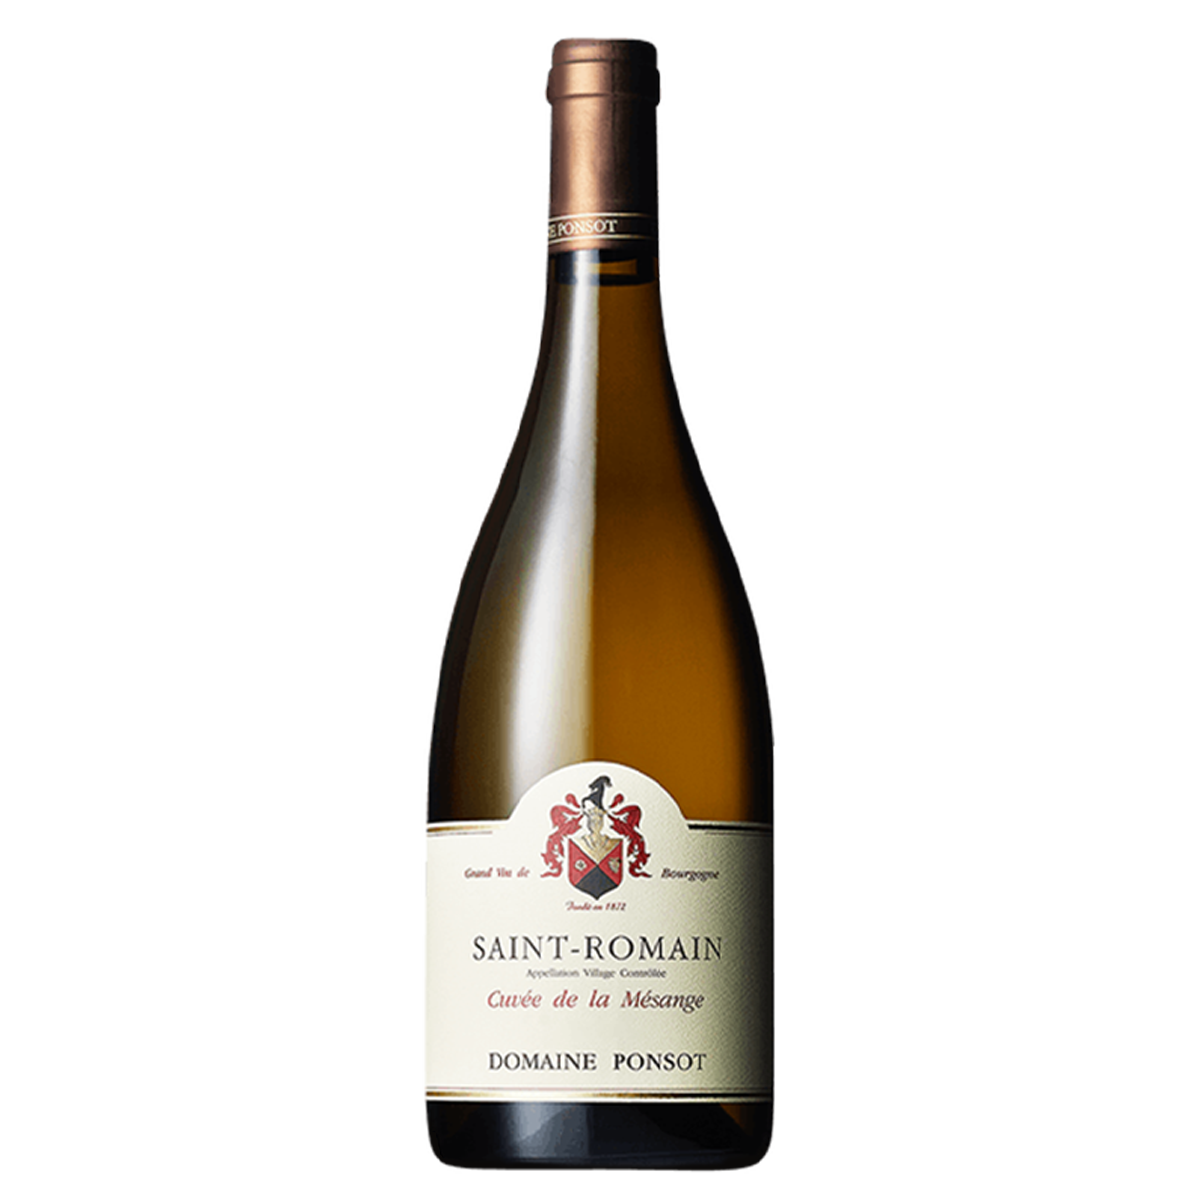 Offer: Domaine Ponsot